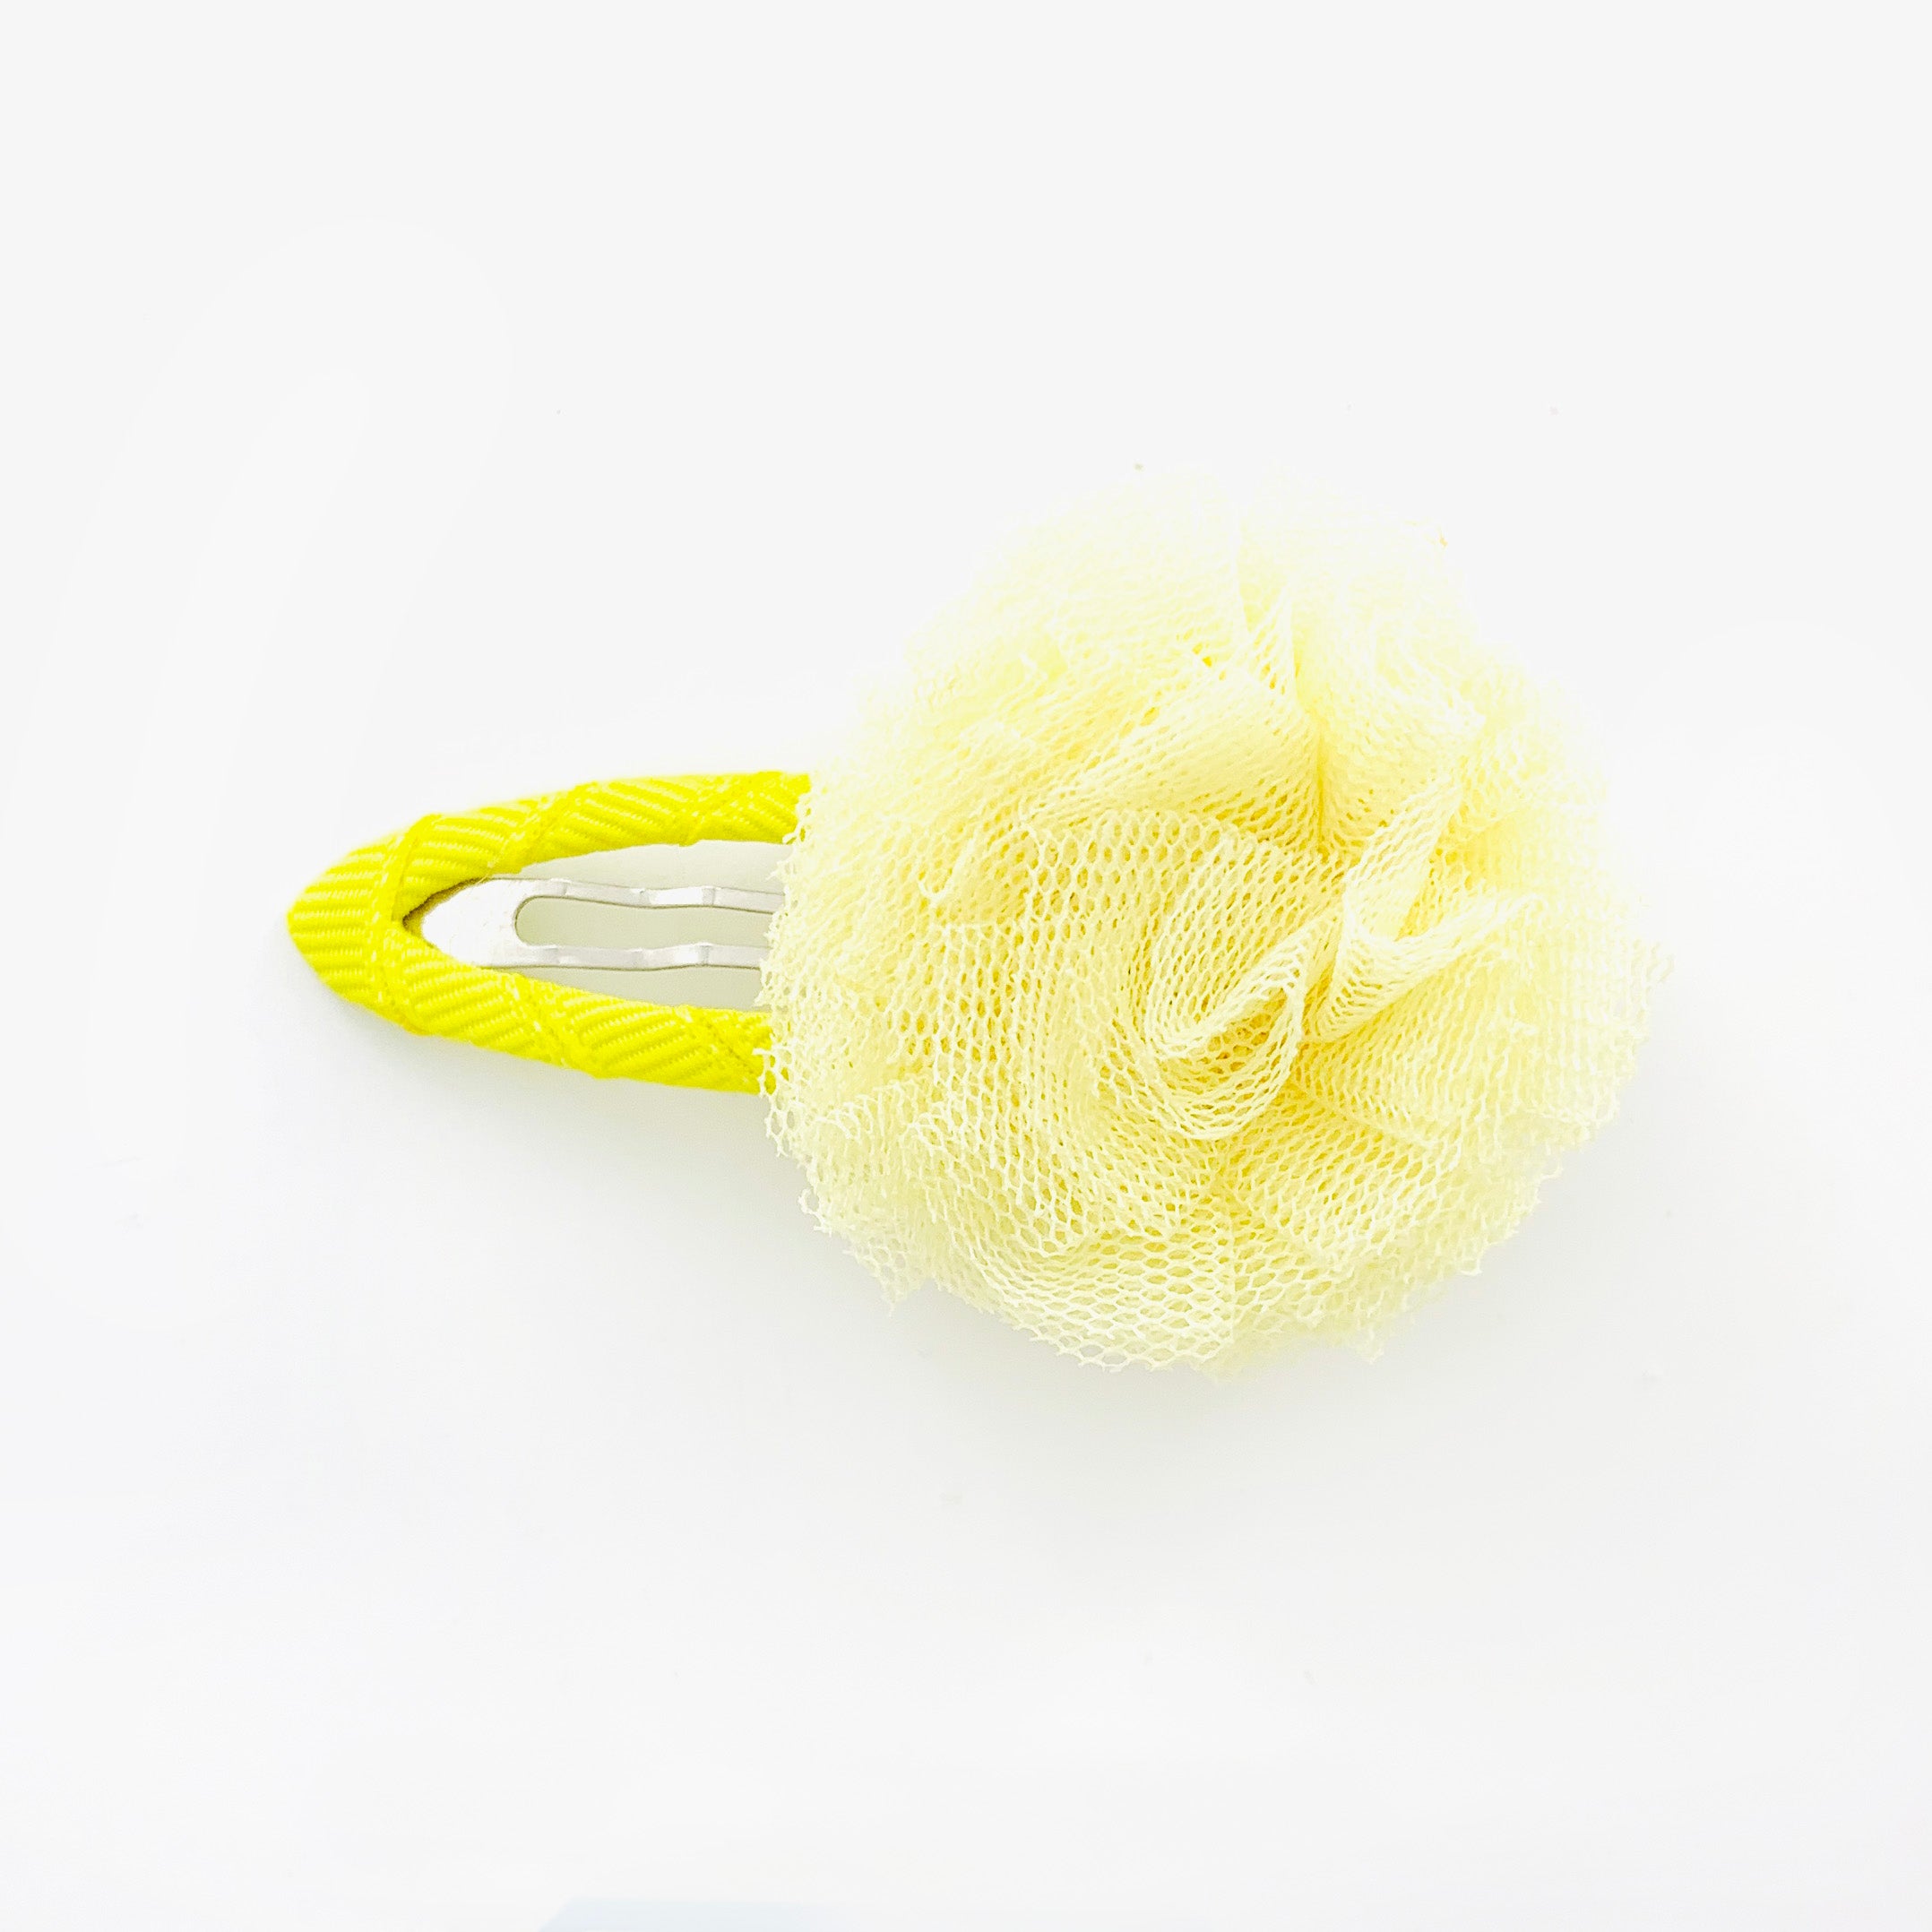 Hair clip with fluffy fabric yellow pom pom